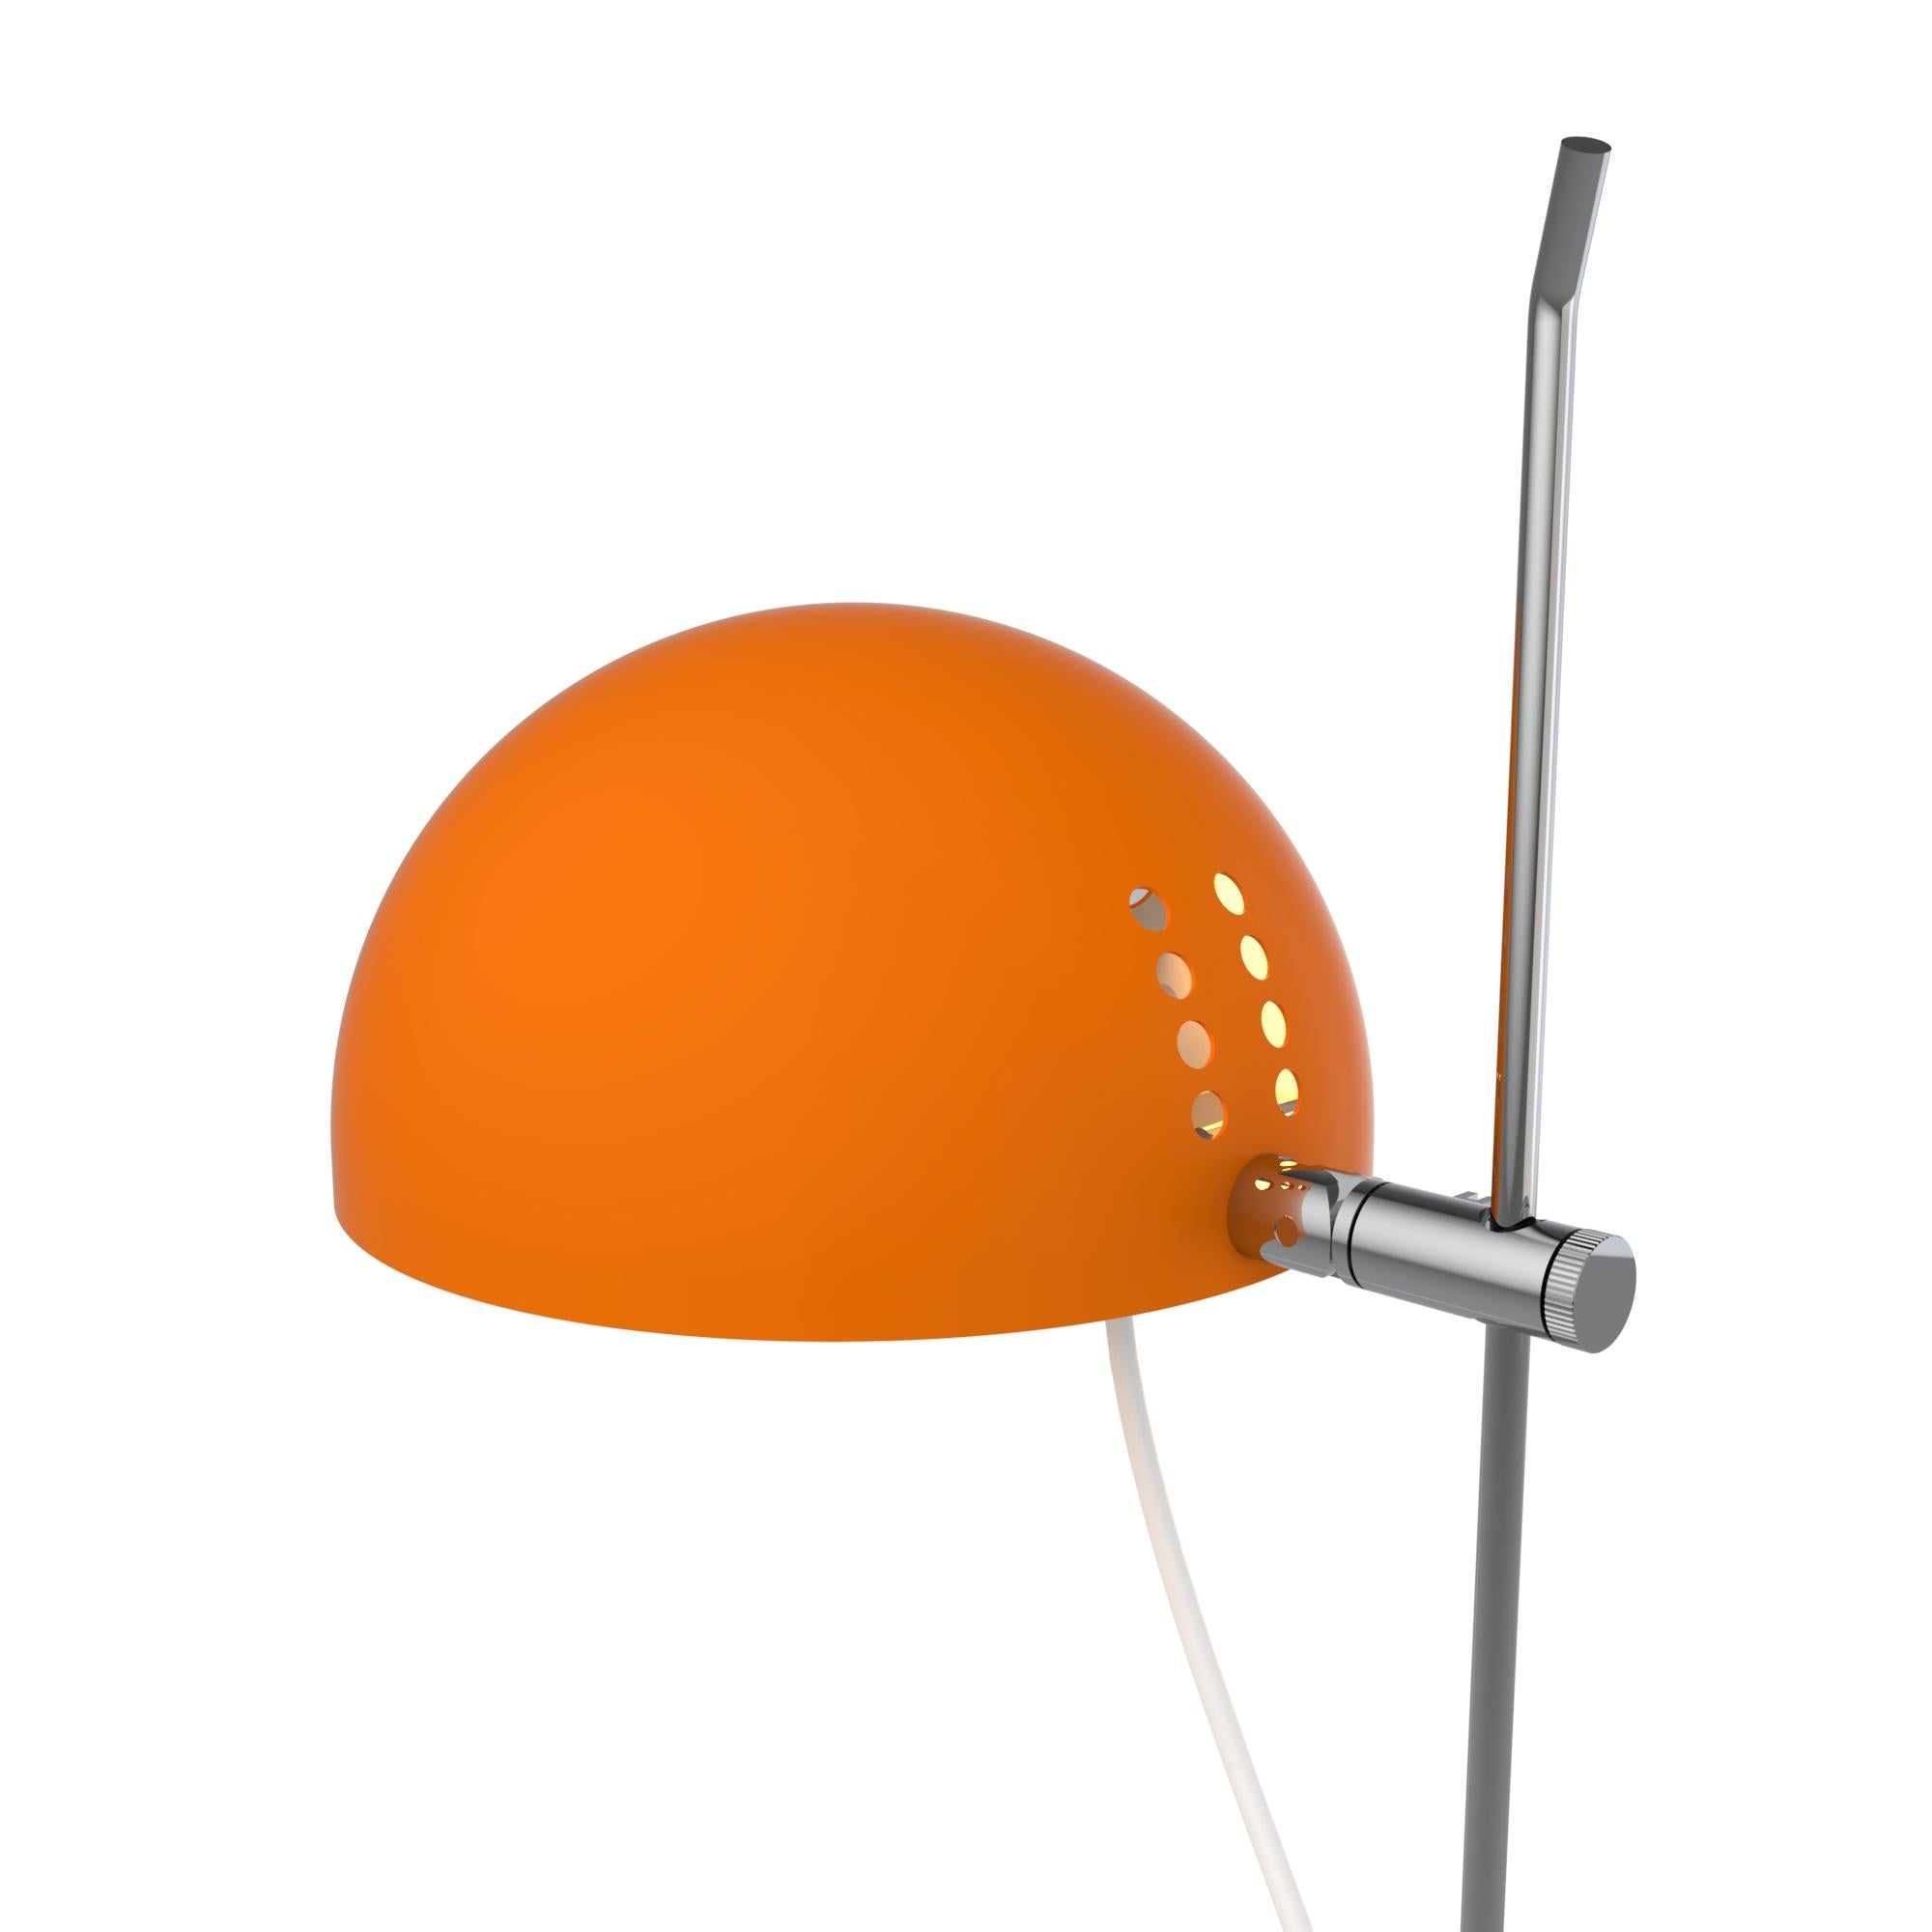 Alain Richard 'A22F' task lamp in orange for Disderot.

Executed in orange painted metal, this newly produced numbered edition with included certificate of authenticity is made in France by Disderot with many of the same small-scale manufacturing